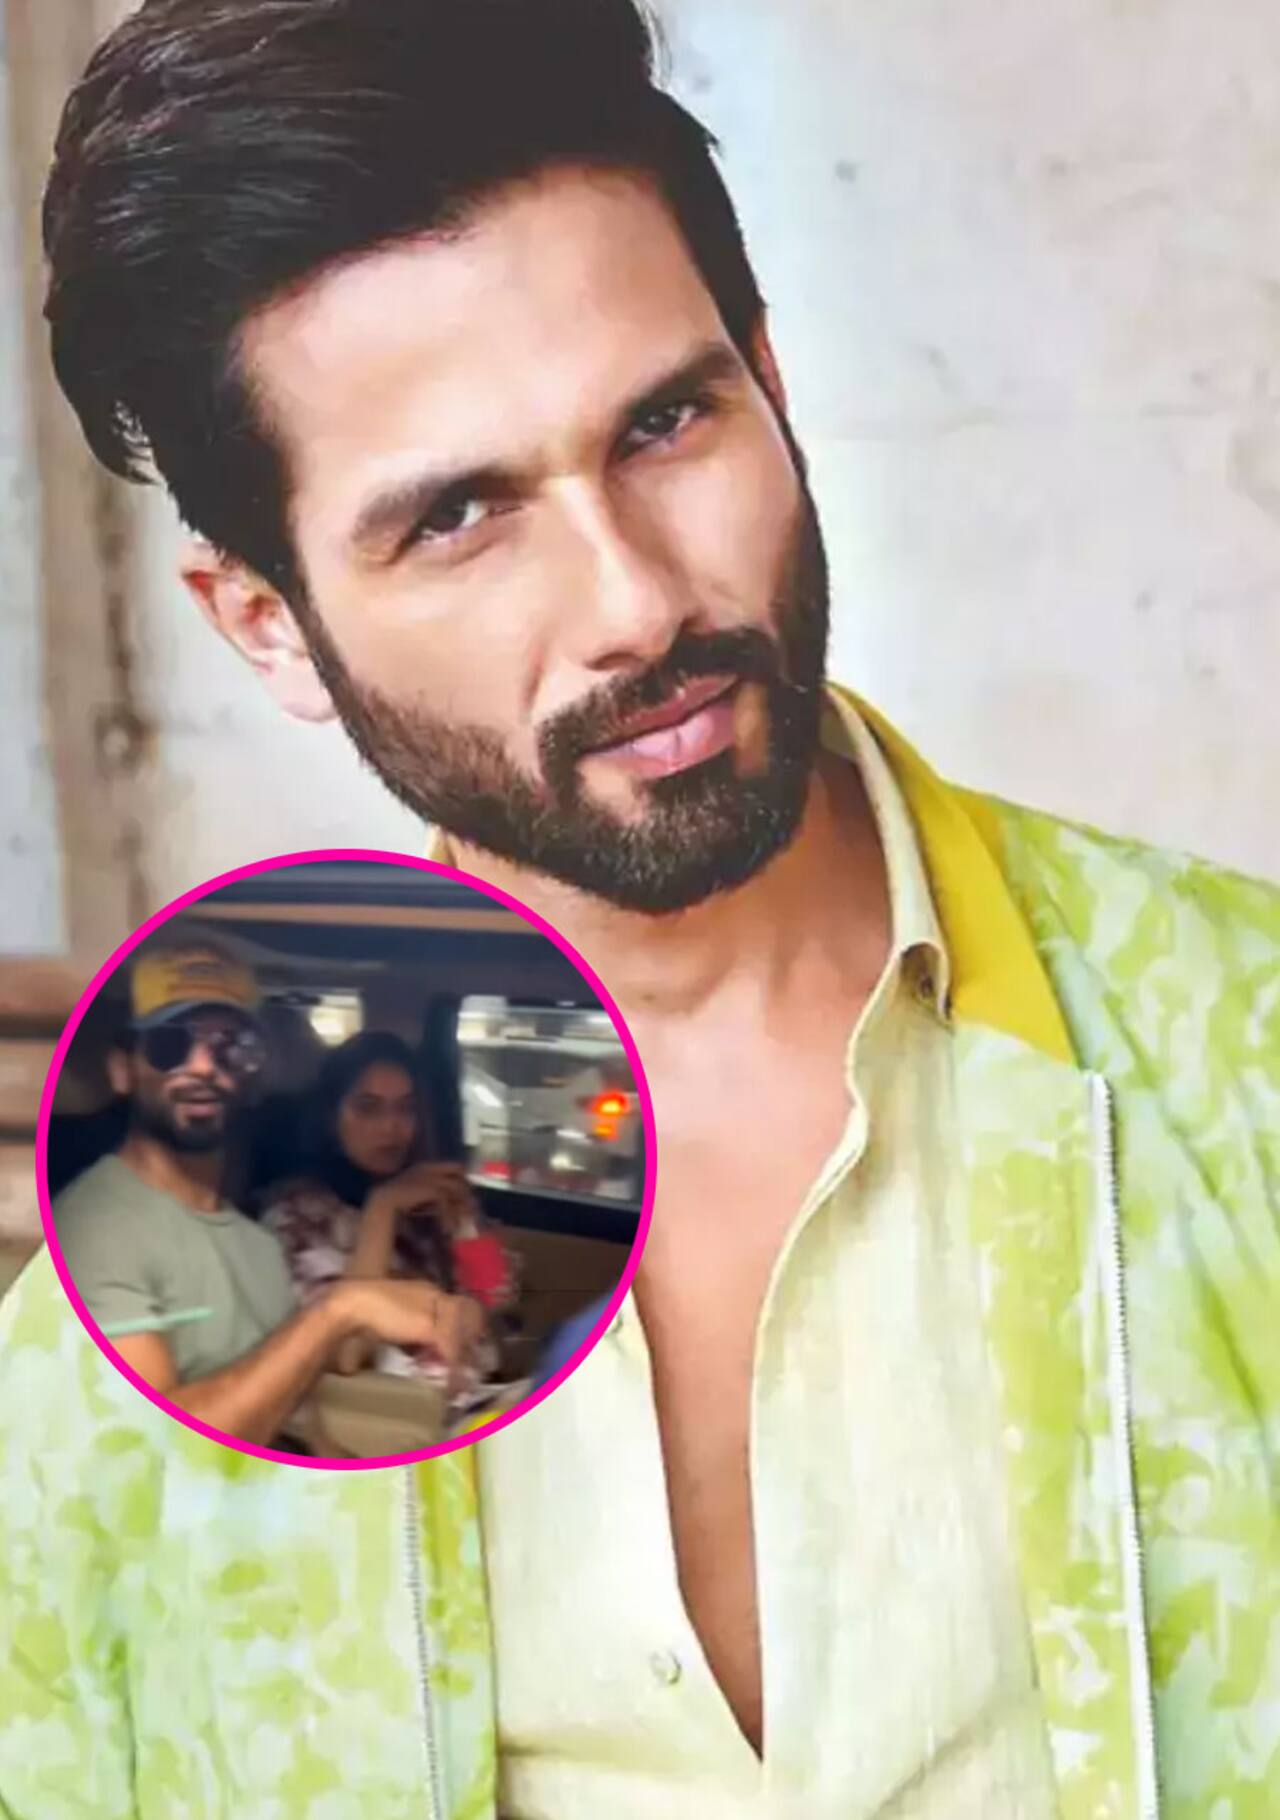 Farzi star Shahid Kapoor loses cool on paparazzi for taking video of them while Mira Rajput was sitting in the car having water